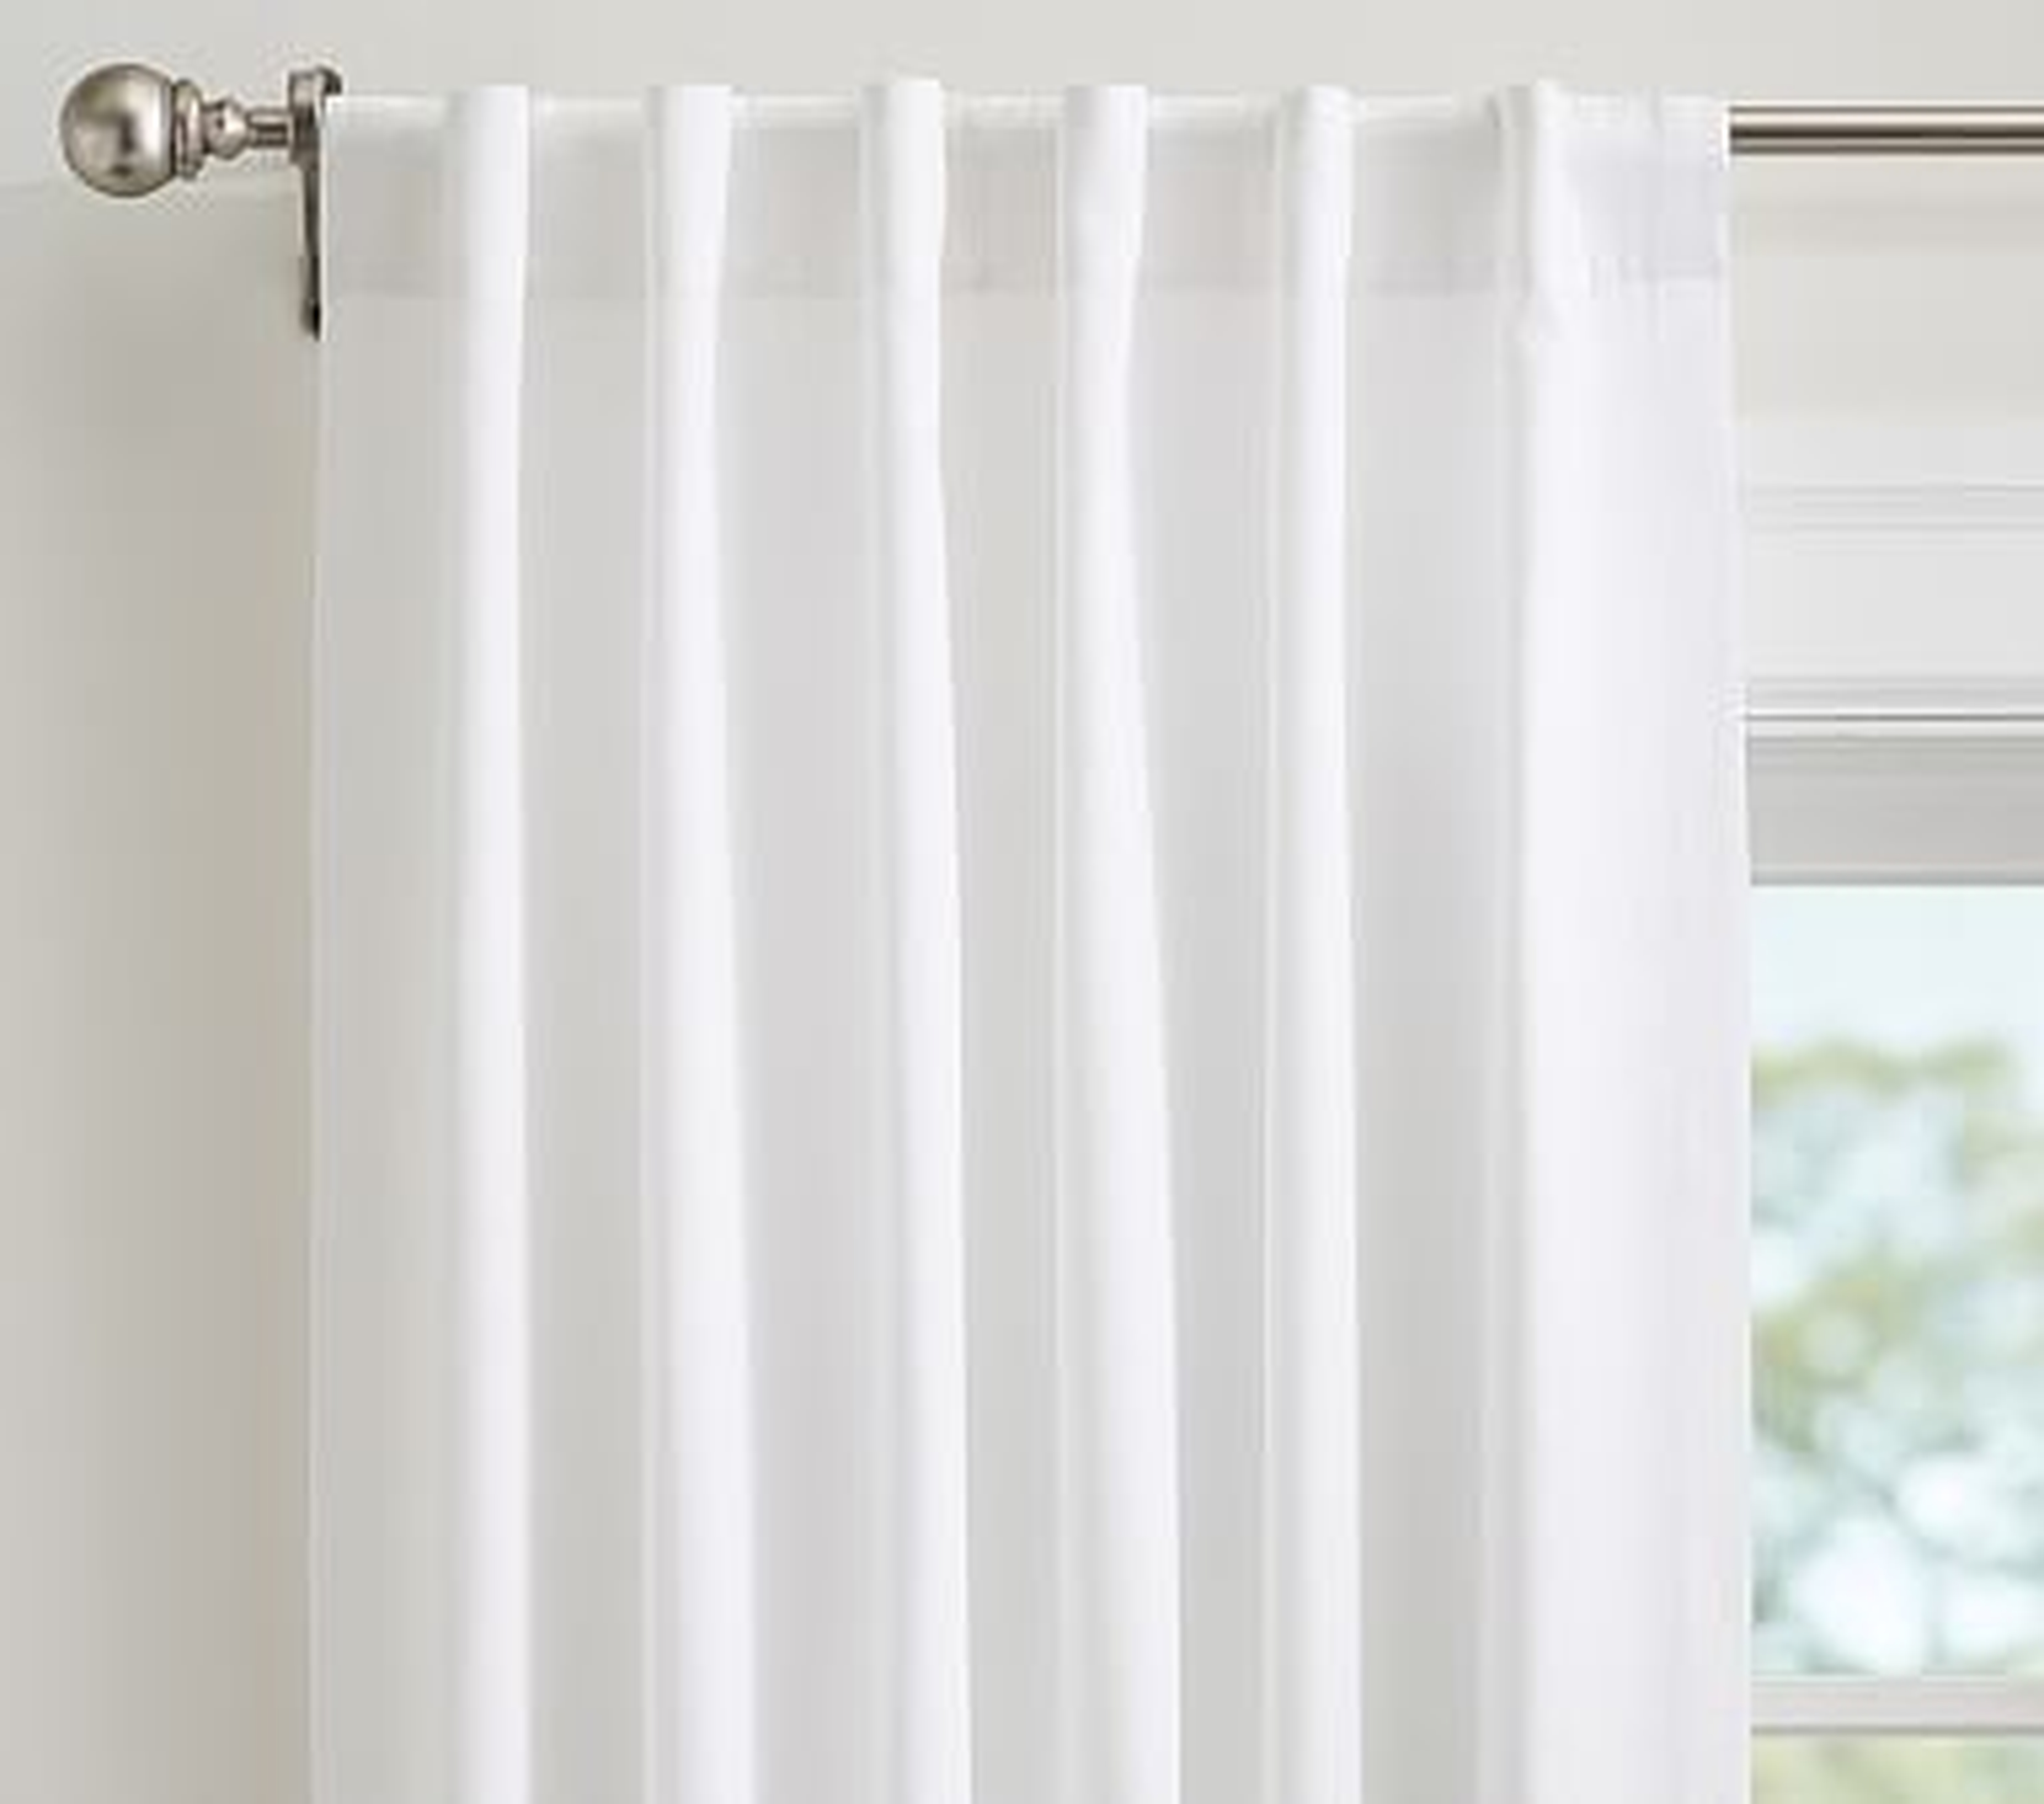 Quincy Cotton Canvas Blackout Curtain, 84", White - Pottery Barn Kids